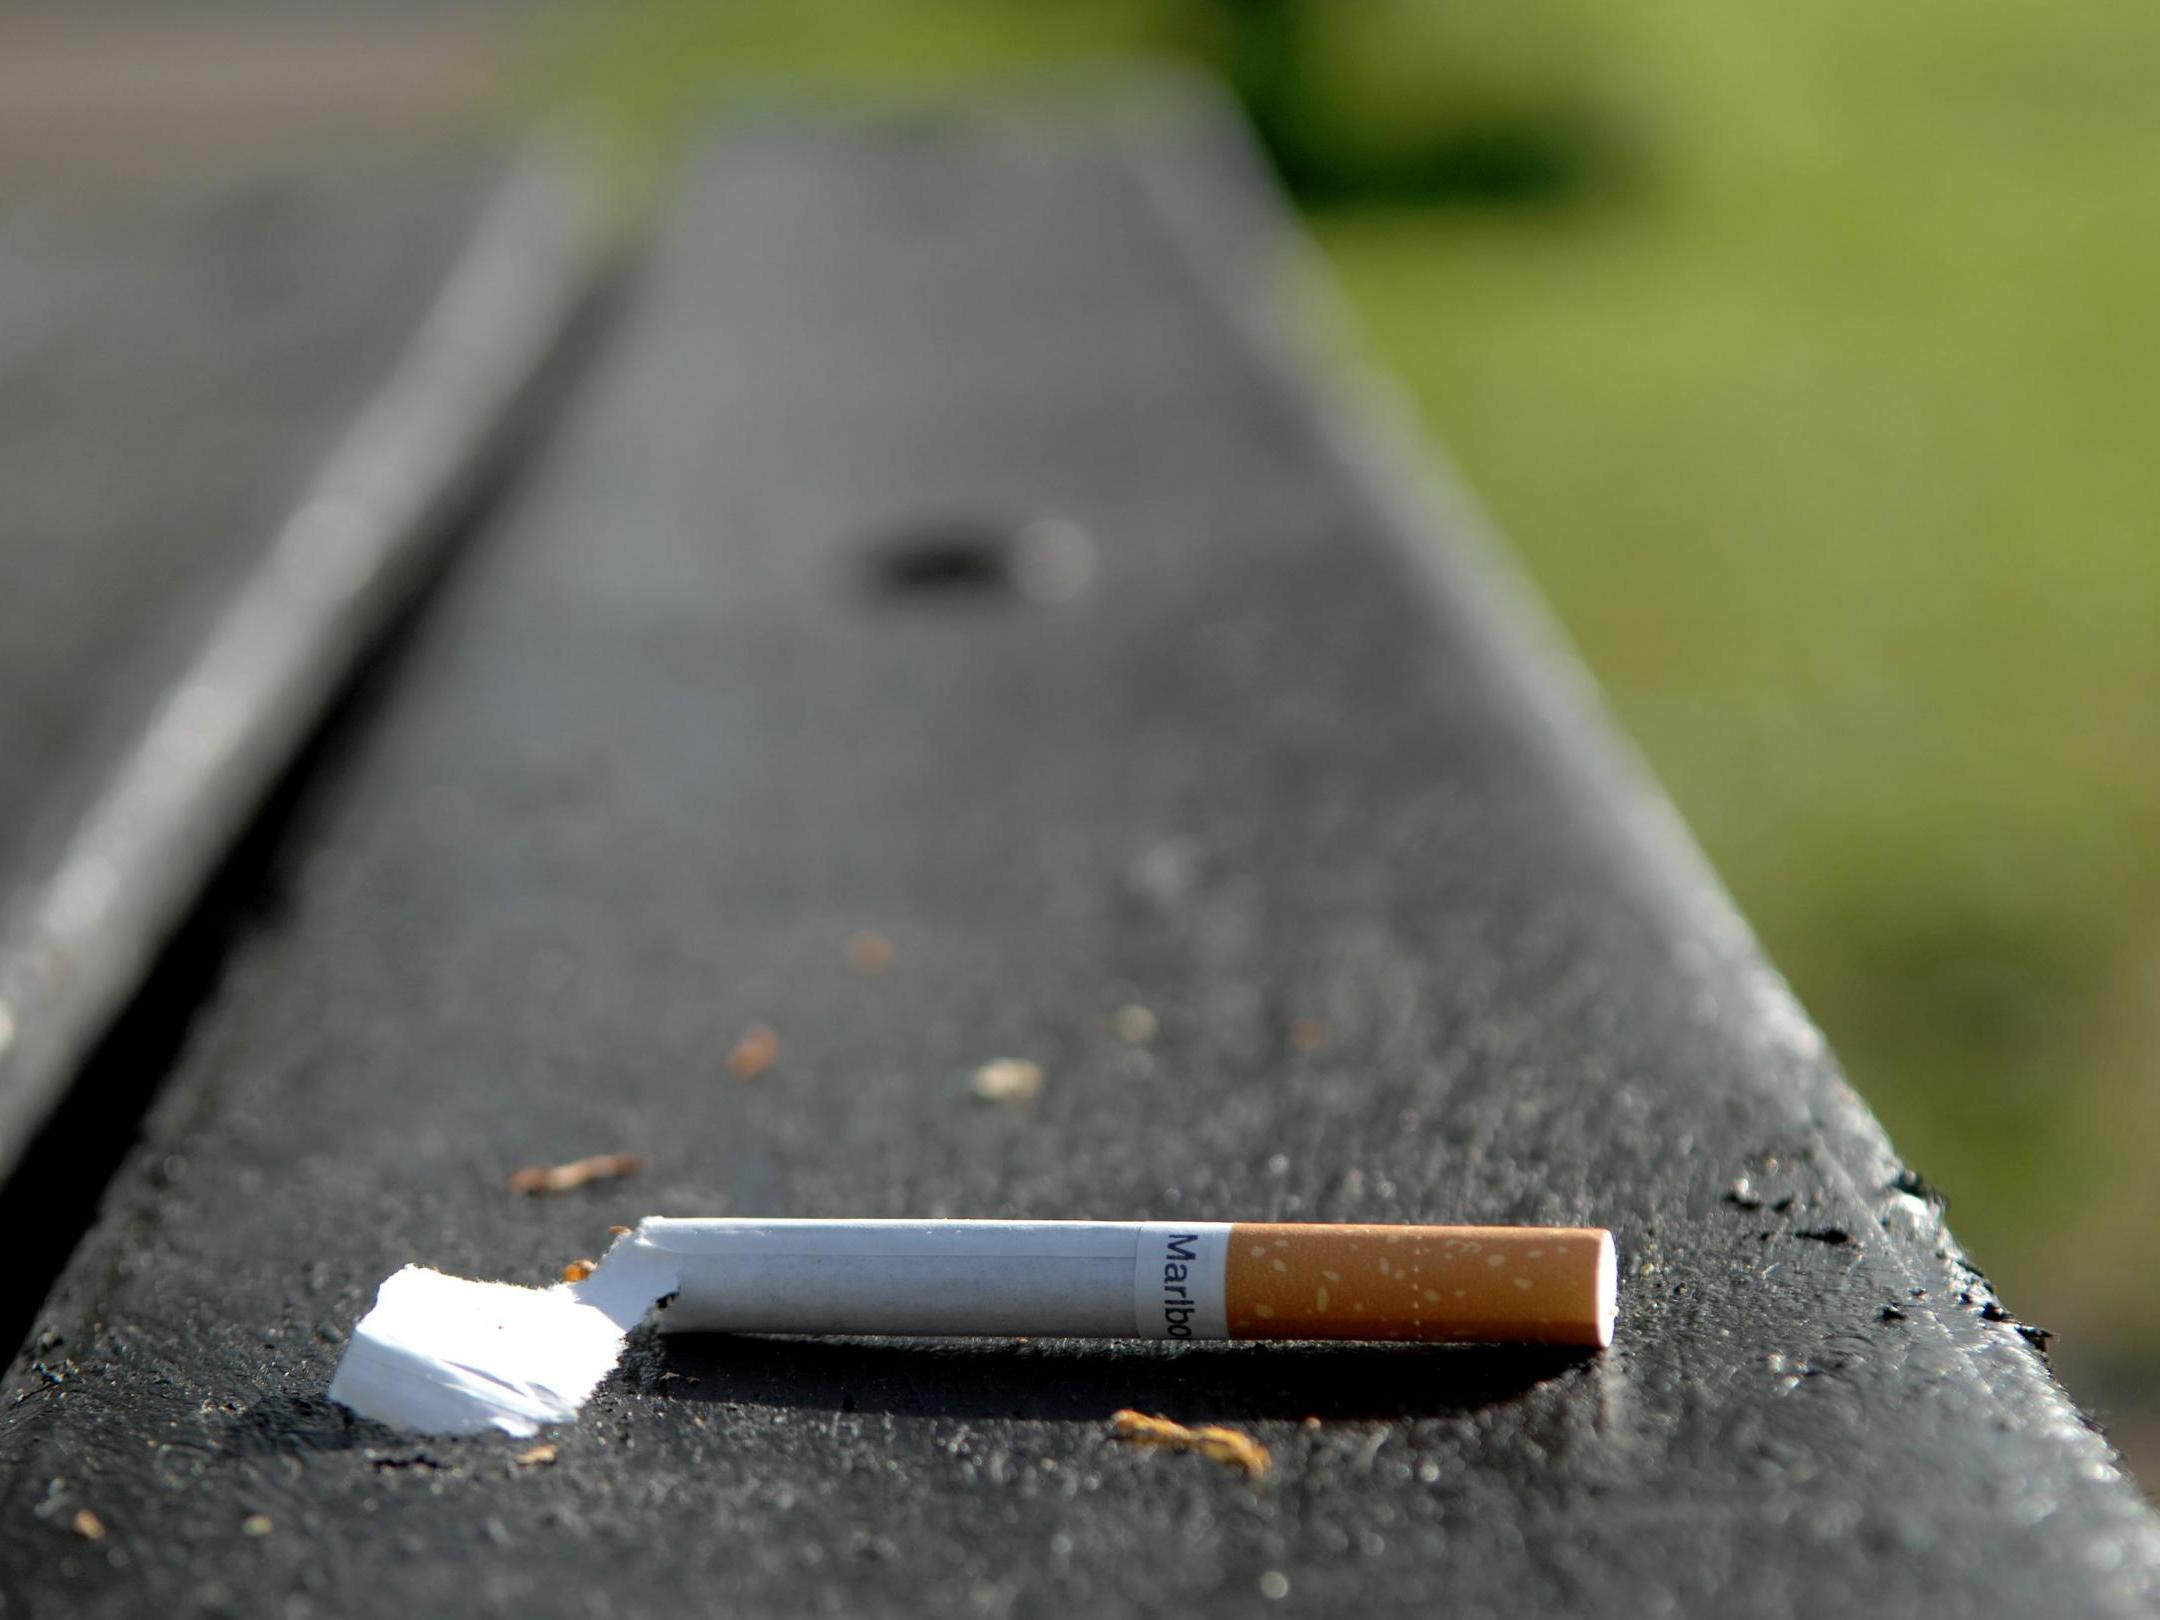 A discarded cigarette left on a bench in Wandsworth Common, London, on 14 April, 2020.